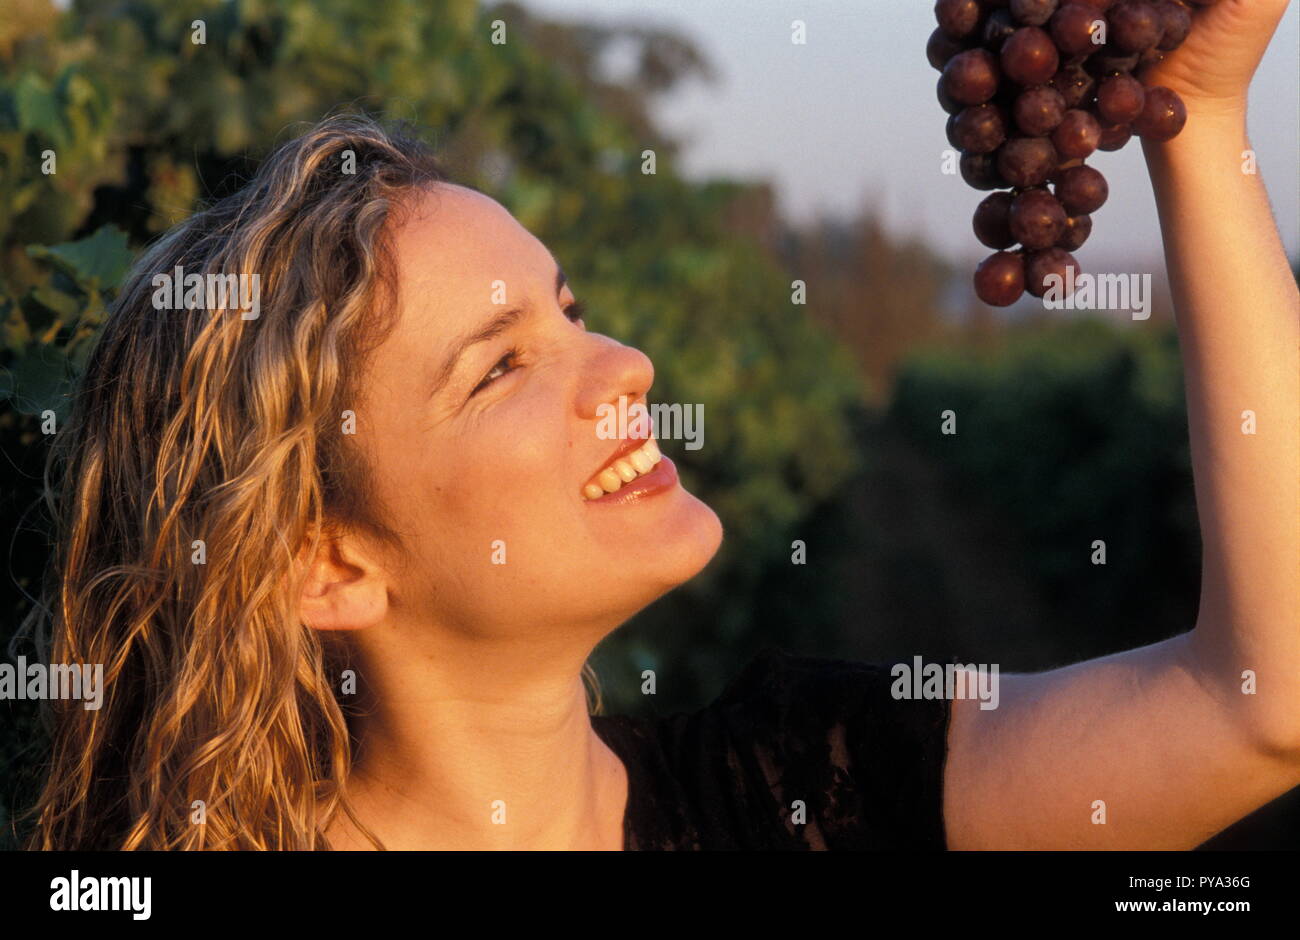 Closeup portrait of attractive young lady having grapes Stock Photo